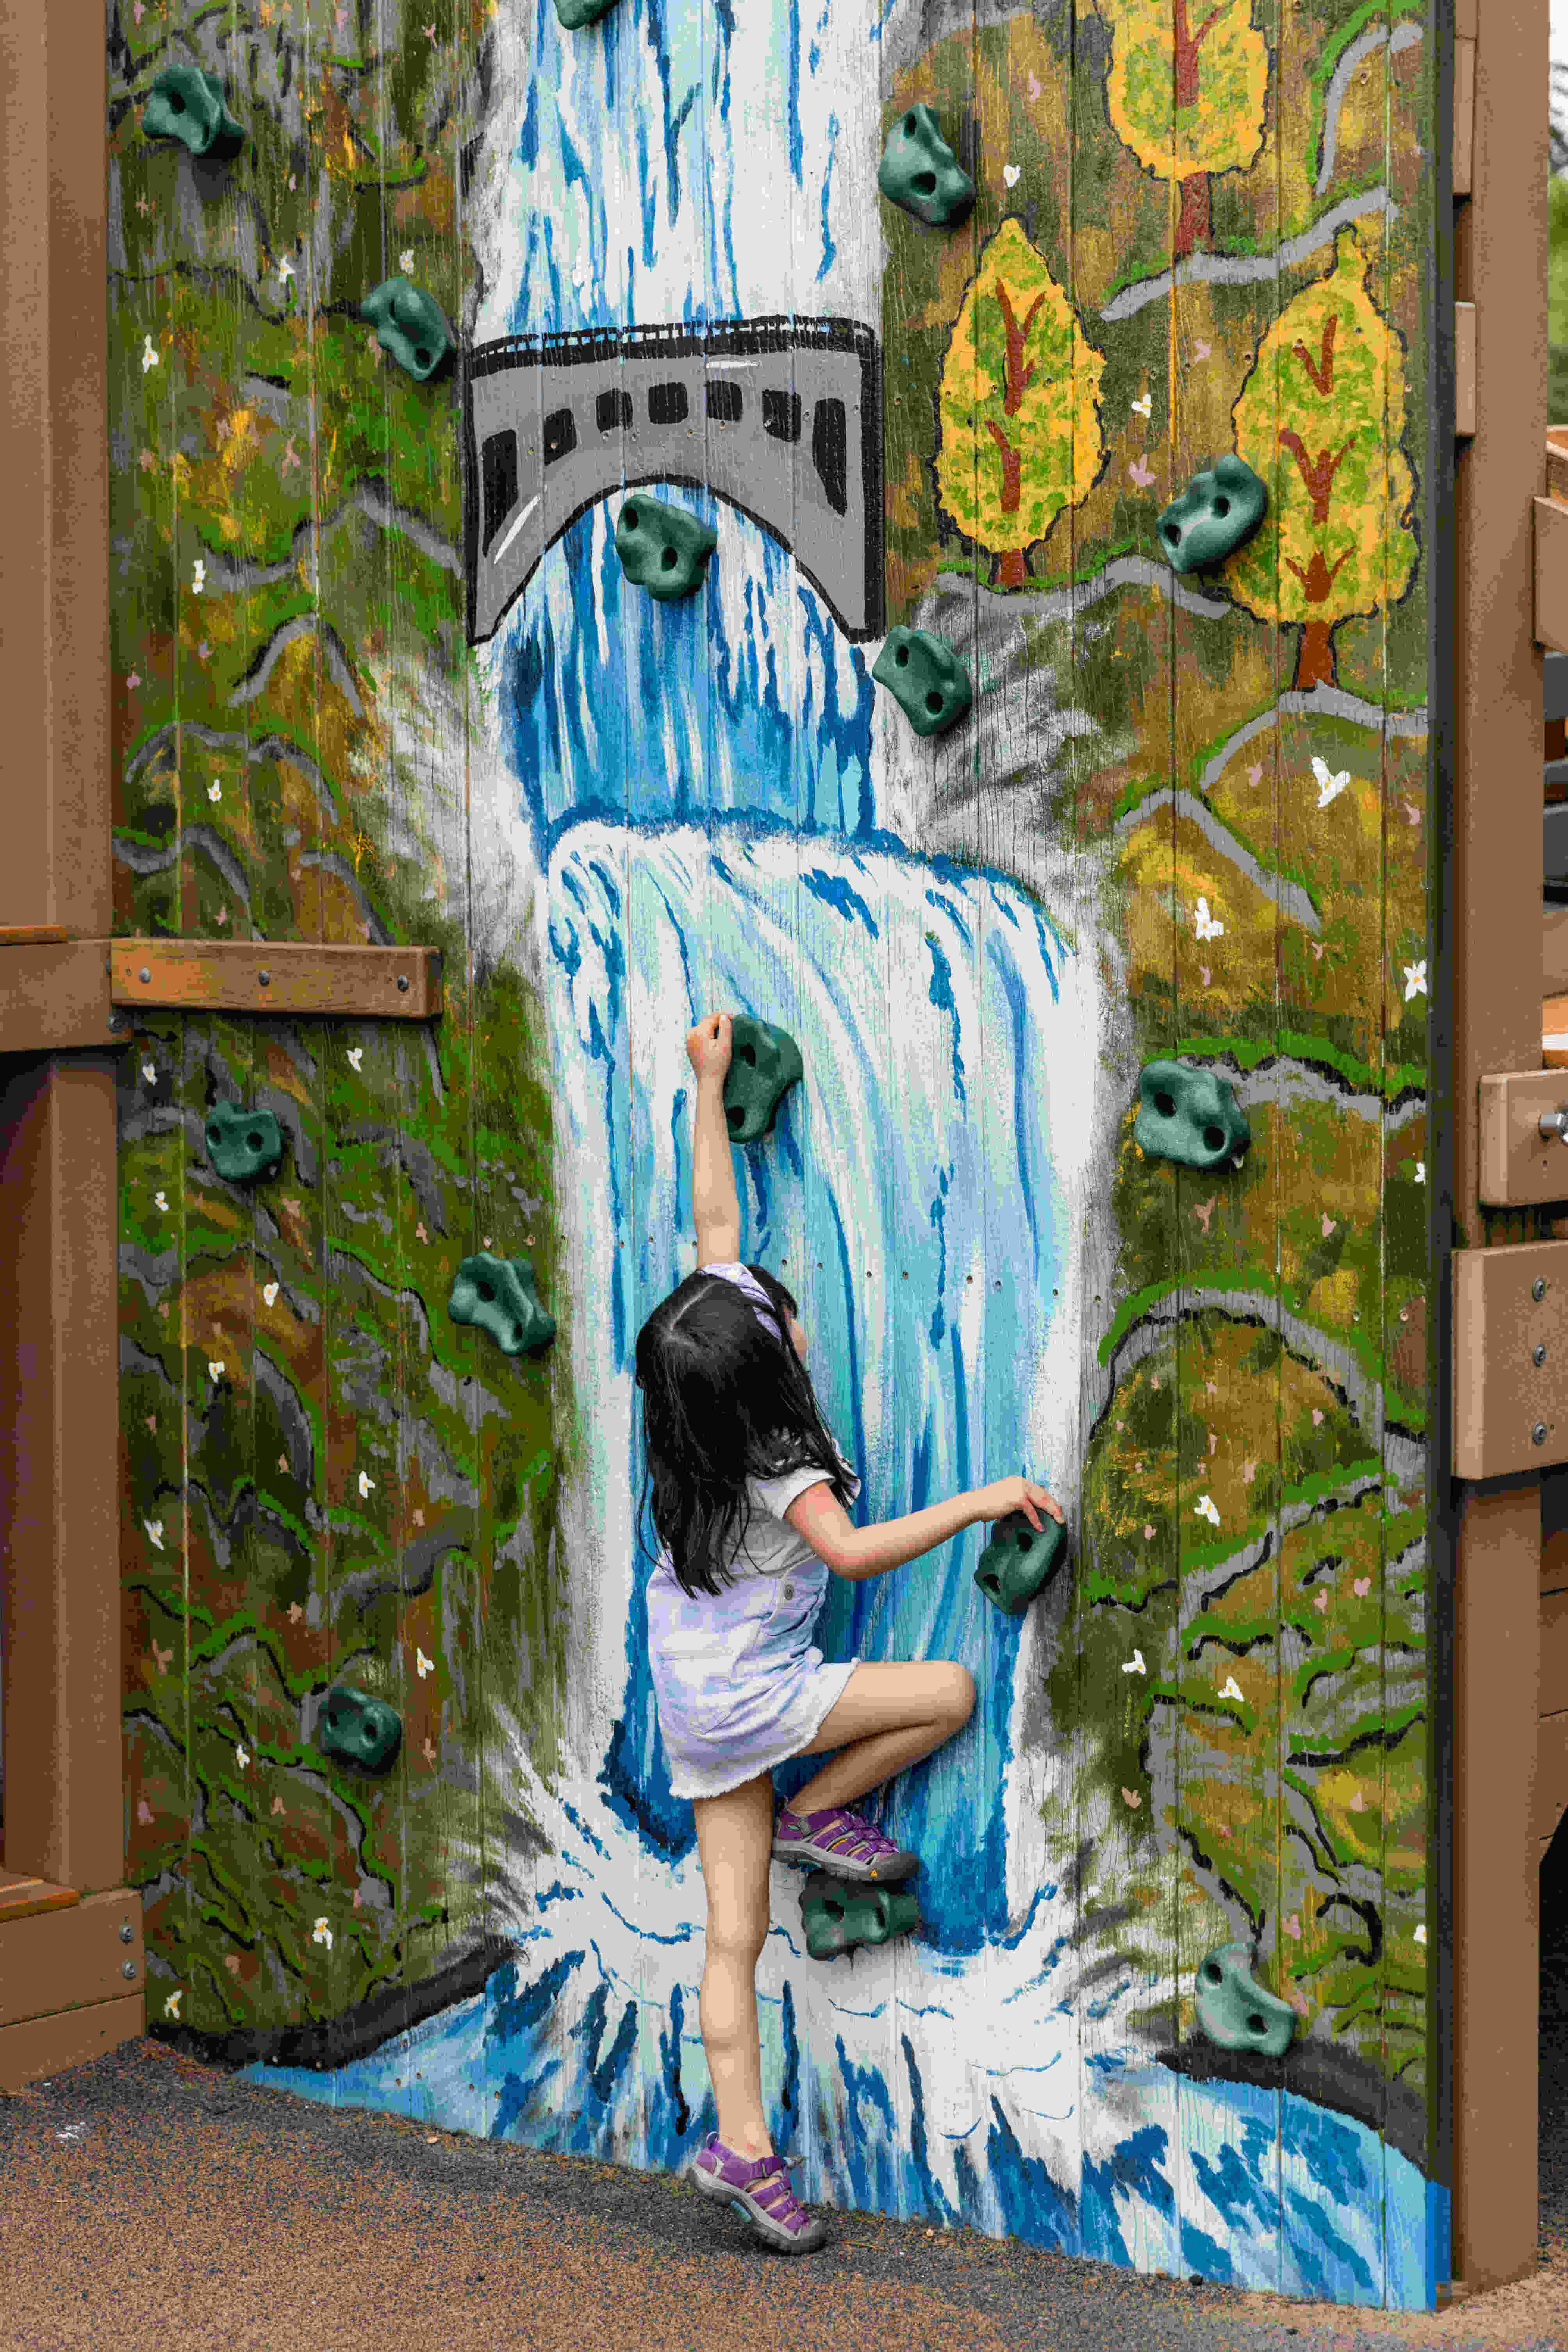 Young girl climbs up outdoor rock wall with Multnomah Falls painted on it.